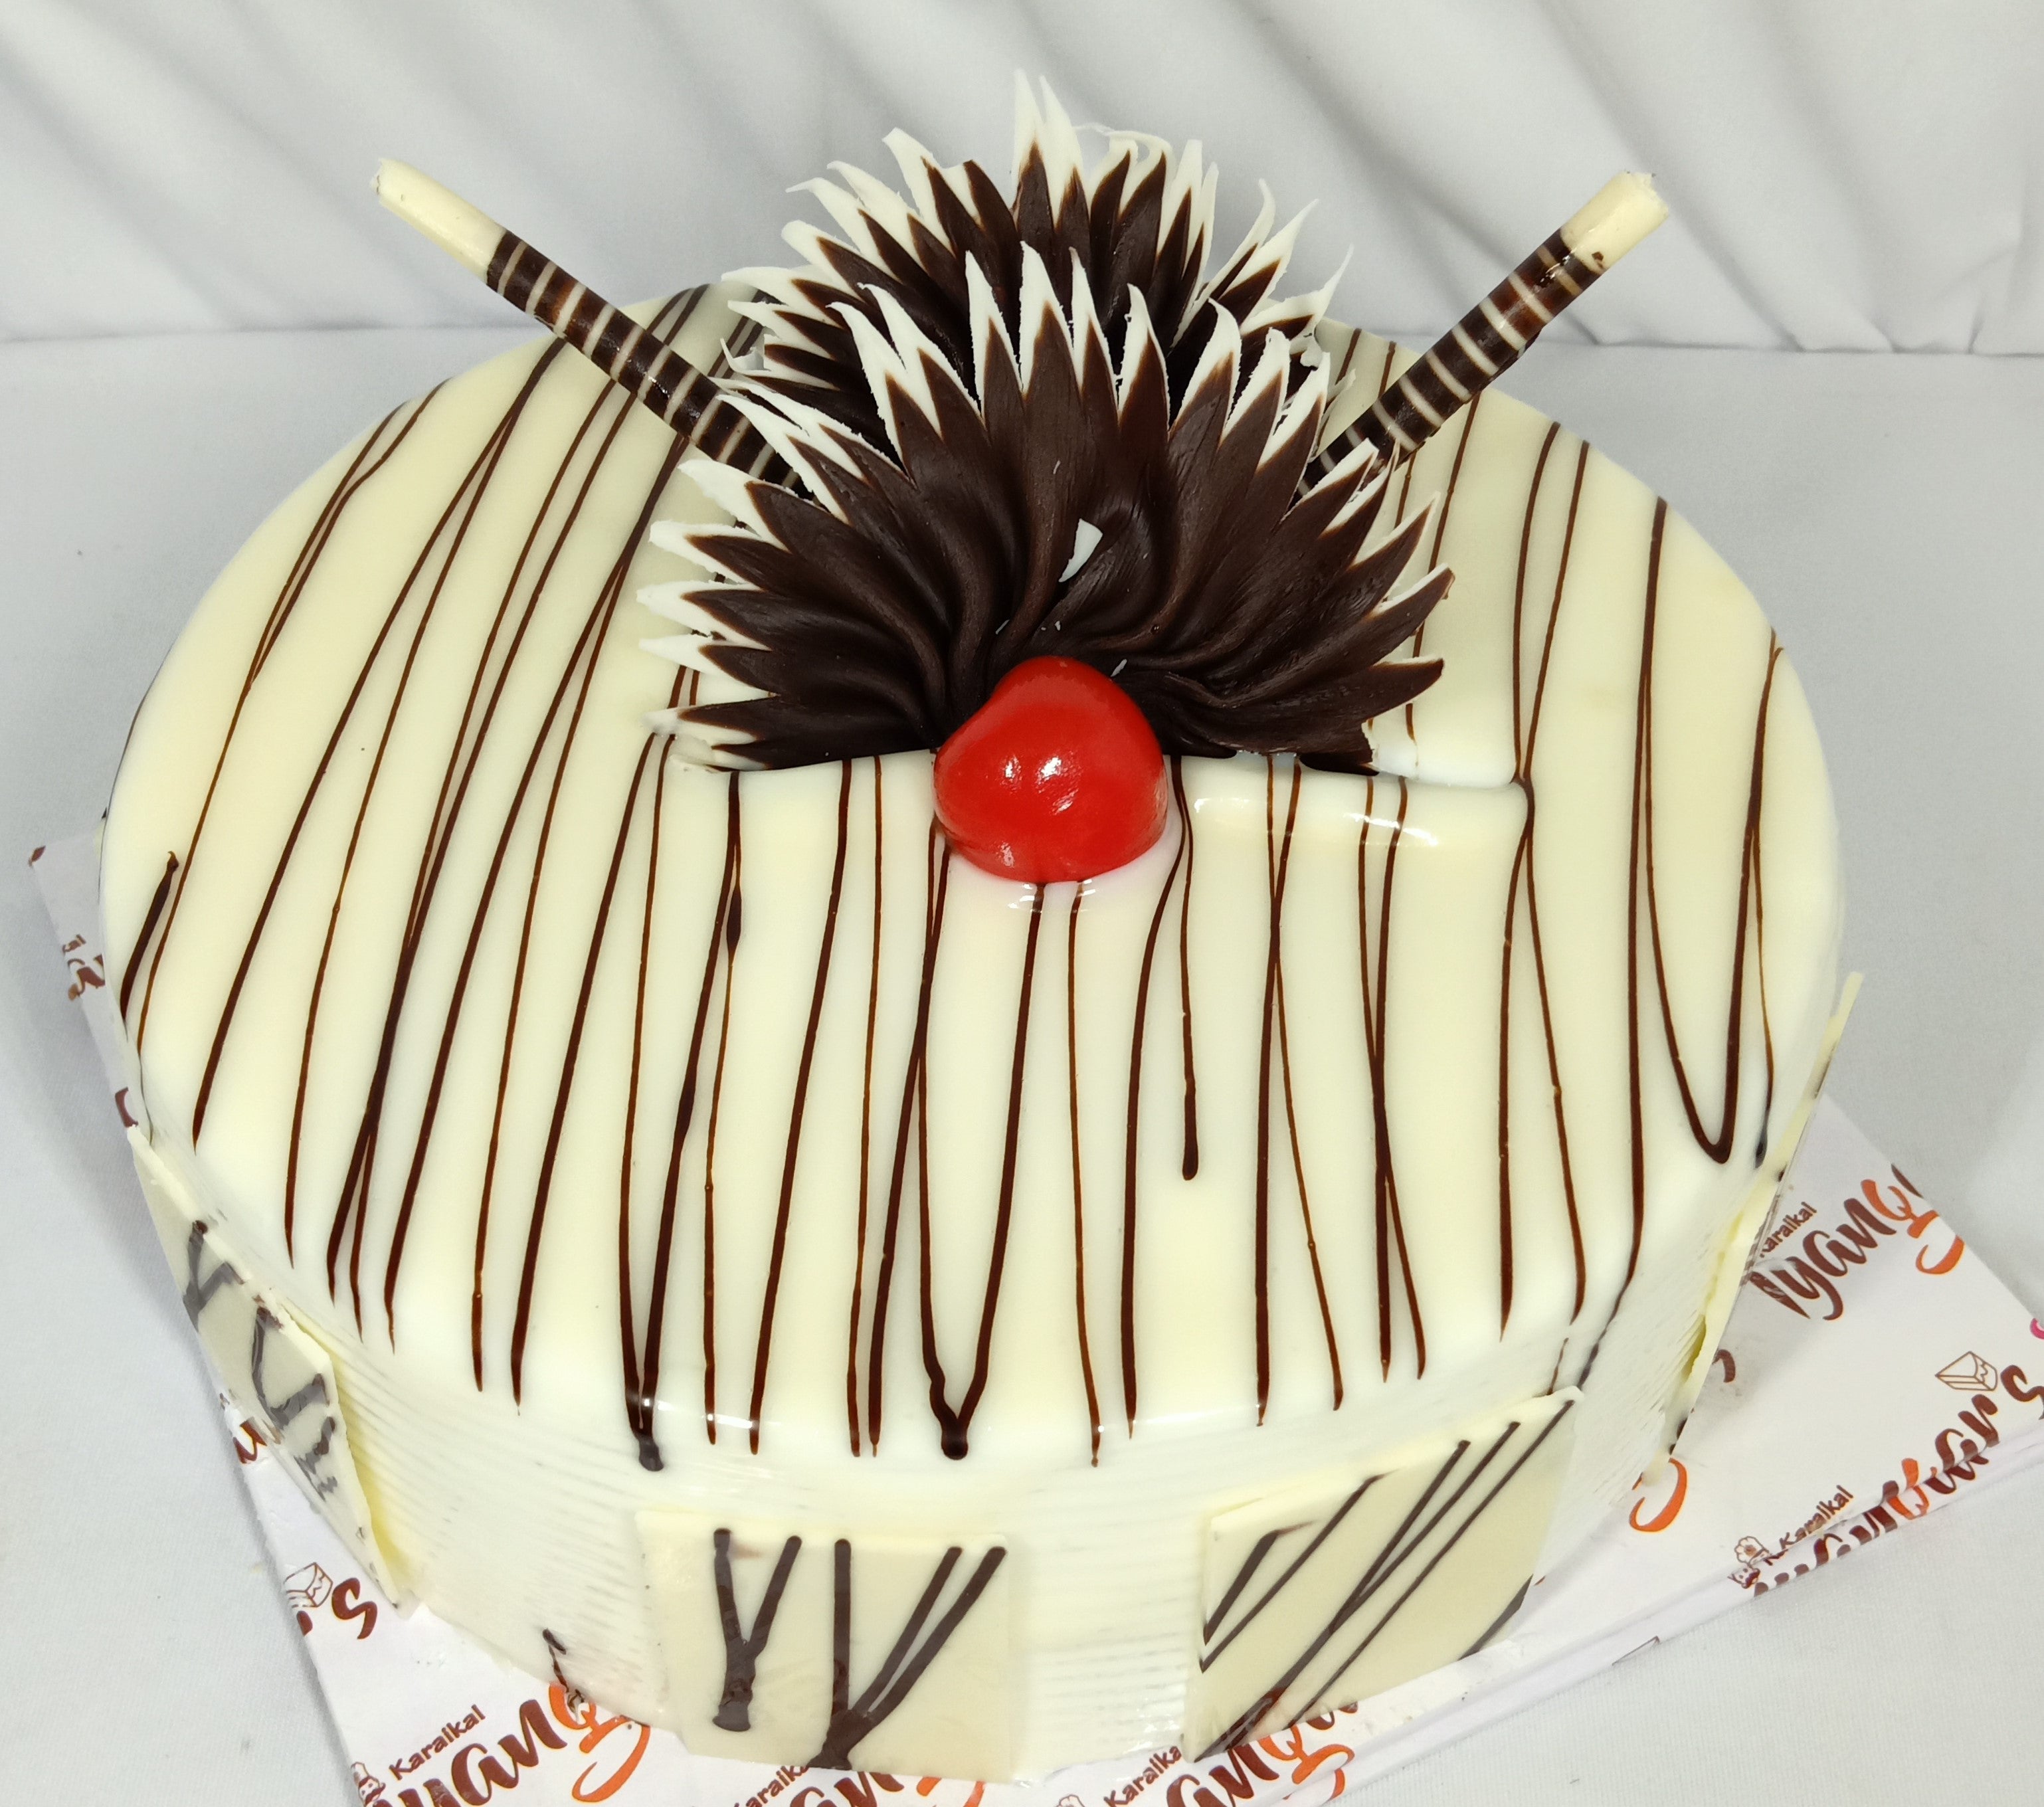 JP live cake and pesty, Bharuch - Restaurant reviews